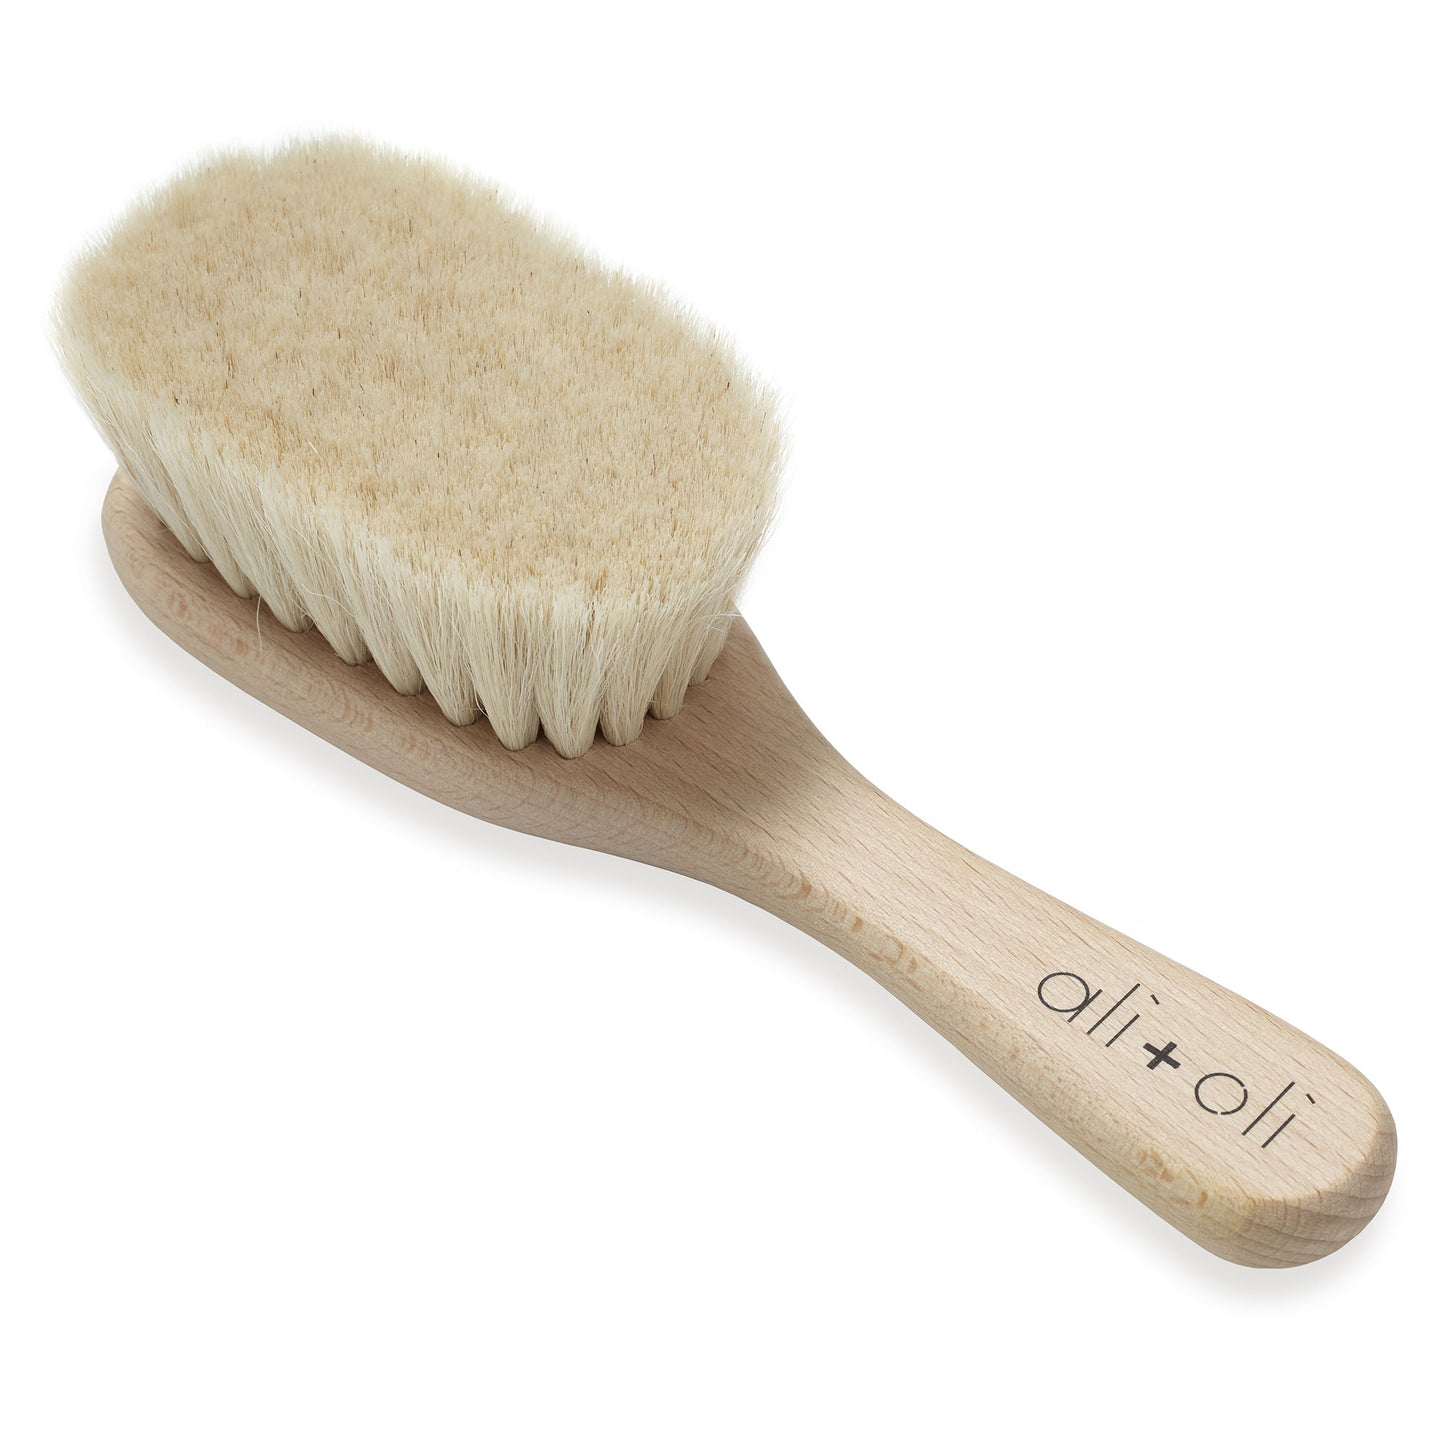 Newborn baby brush natural wood and goat hair made in germany